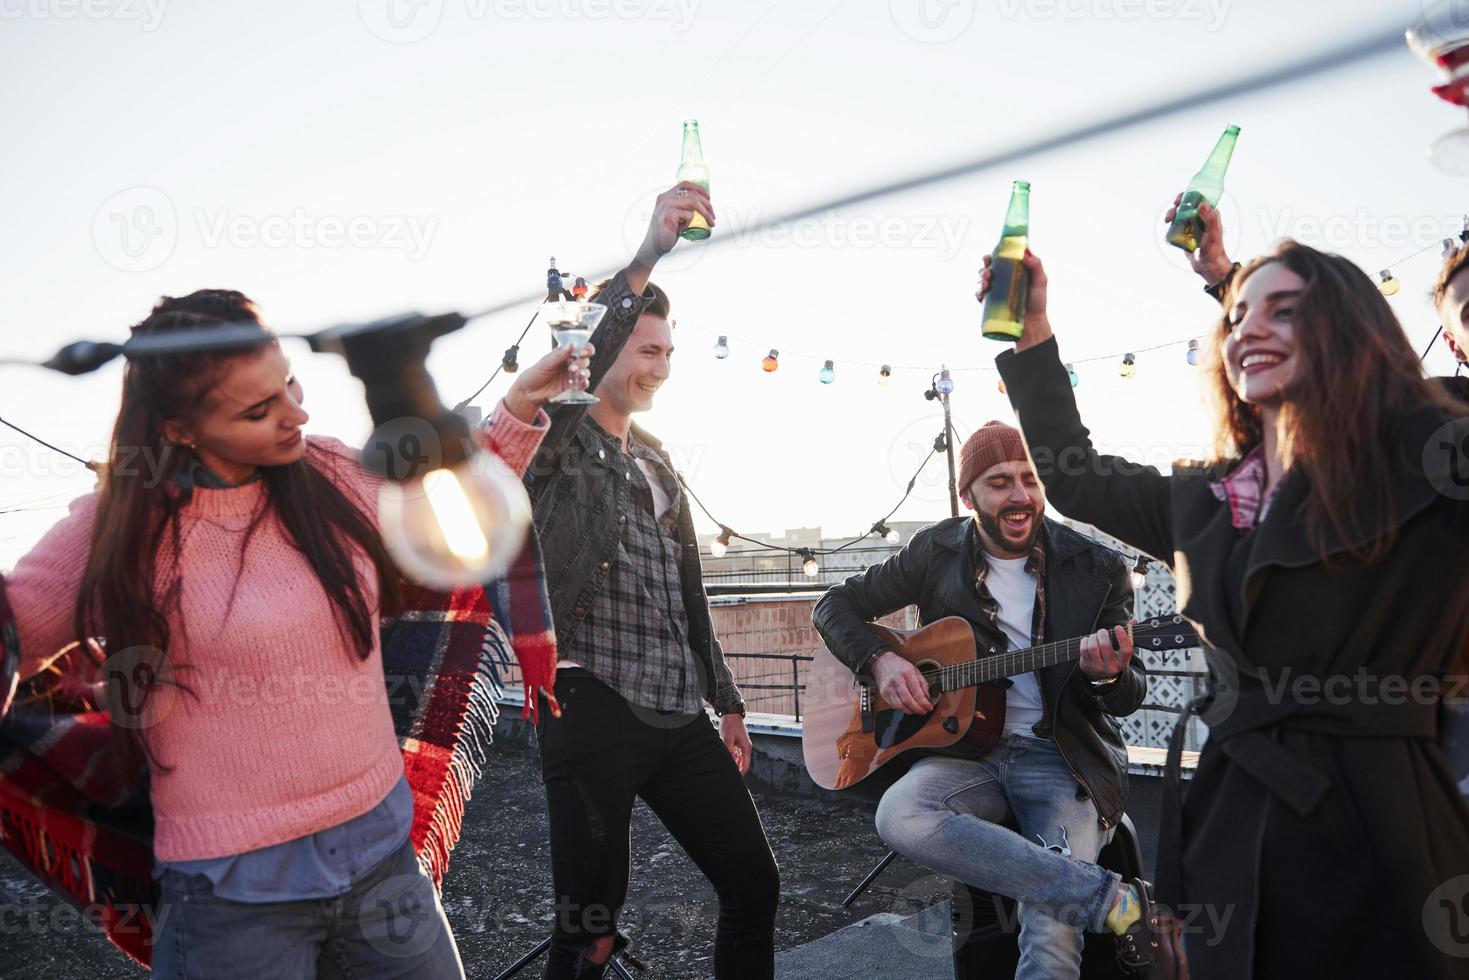 Bottles up and sing. Group of young people having celebration at a rooftop with some alcohol and guitar playing photo